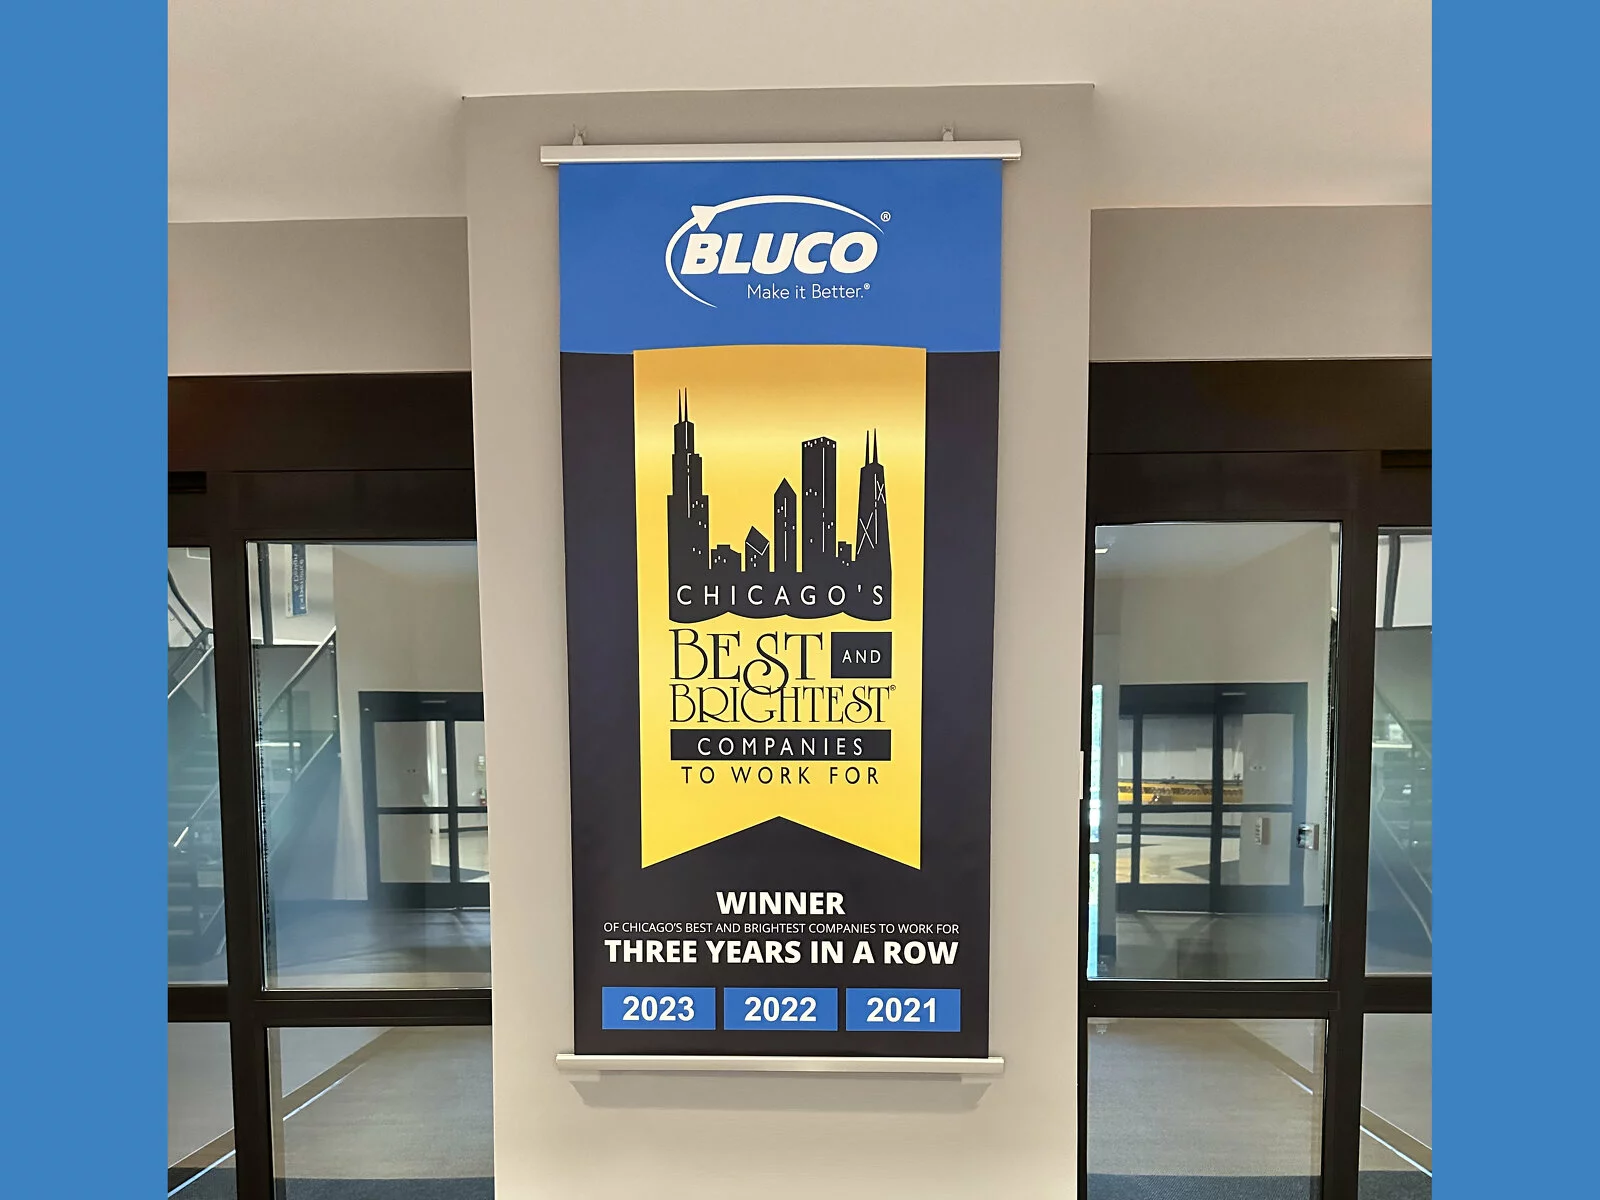  2023/06/Bluco_Best-and-Brightest-Chicago-Thumbnail-1.jpg 